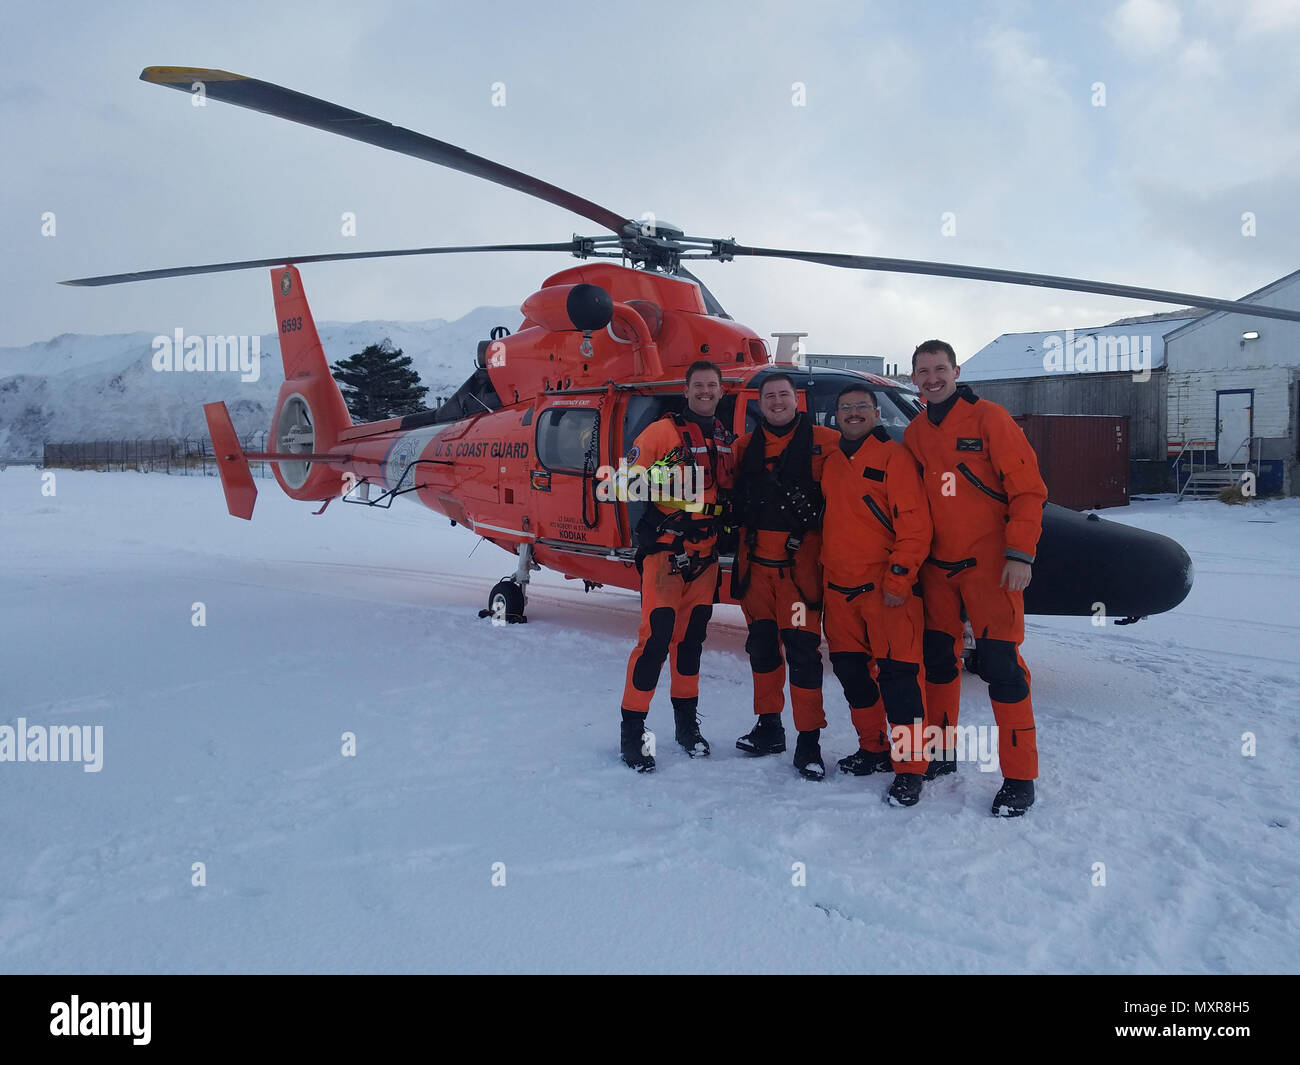 Crew members of a Coast Guard Air Station Kodiak MH-65 Dolphin take a photo with two men they rescued after their R22 helicopter crashed near the Dutch Harbor Airport on Unalaska Island, Alaska, Dec. 2, 2016. The helicopter reportedly encountered whiteout conditions and then crashed. U.S. Coast Guard photo by Lt. Craig Hermiller. Stock Photo